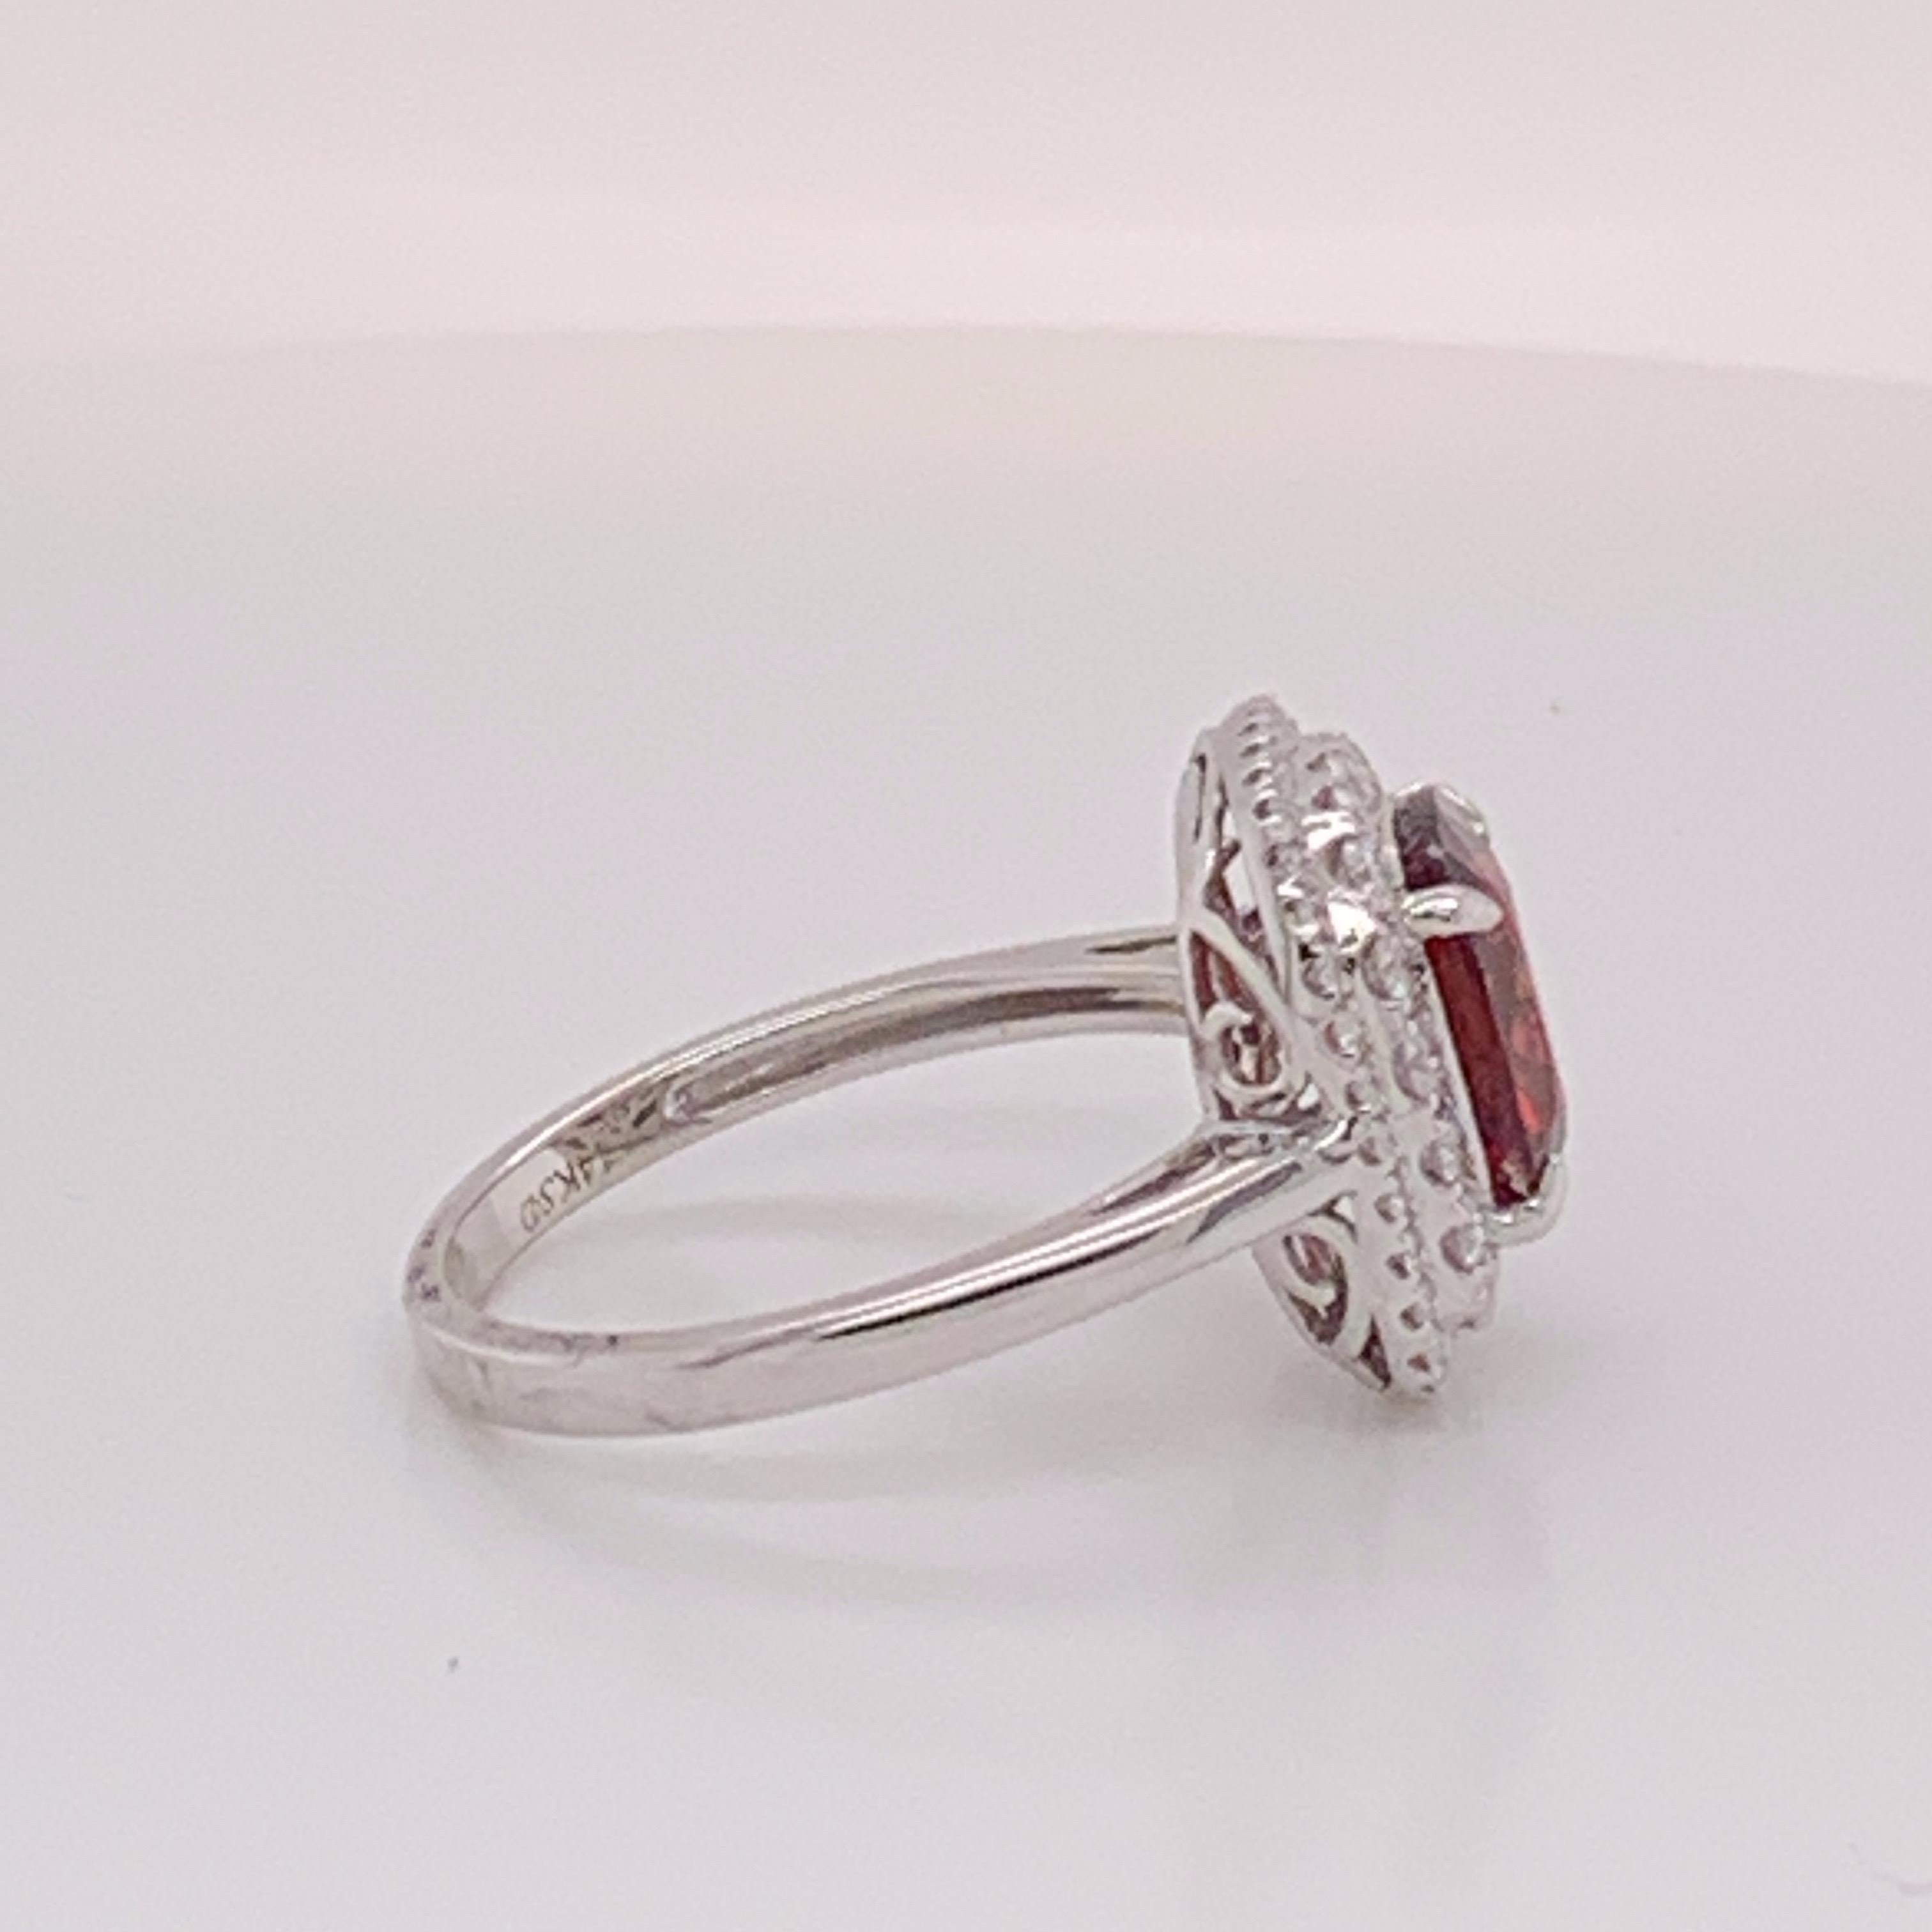 Natural cushion shape Red spinal 2.77 carat and white round diamonds 0.47 carat set in 14 Karat white gold is one of a kind handcrafted Ring. The size of the ring is 7 but can be resized if needed.